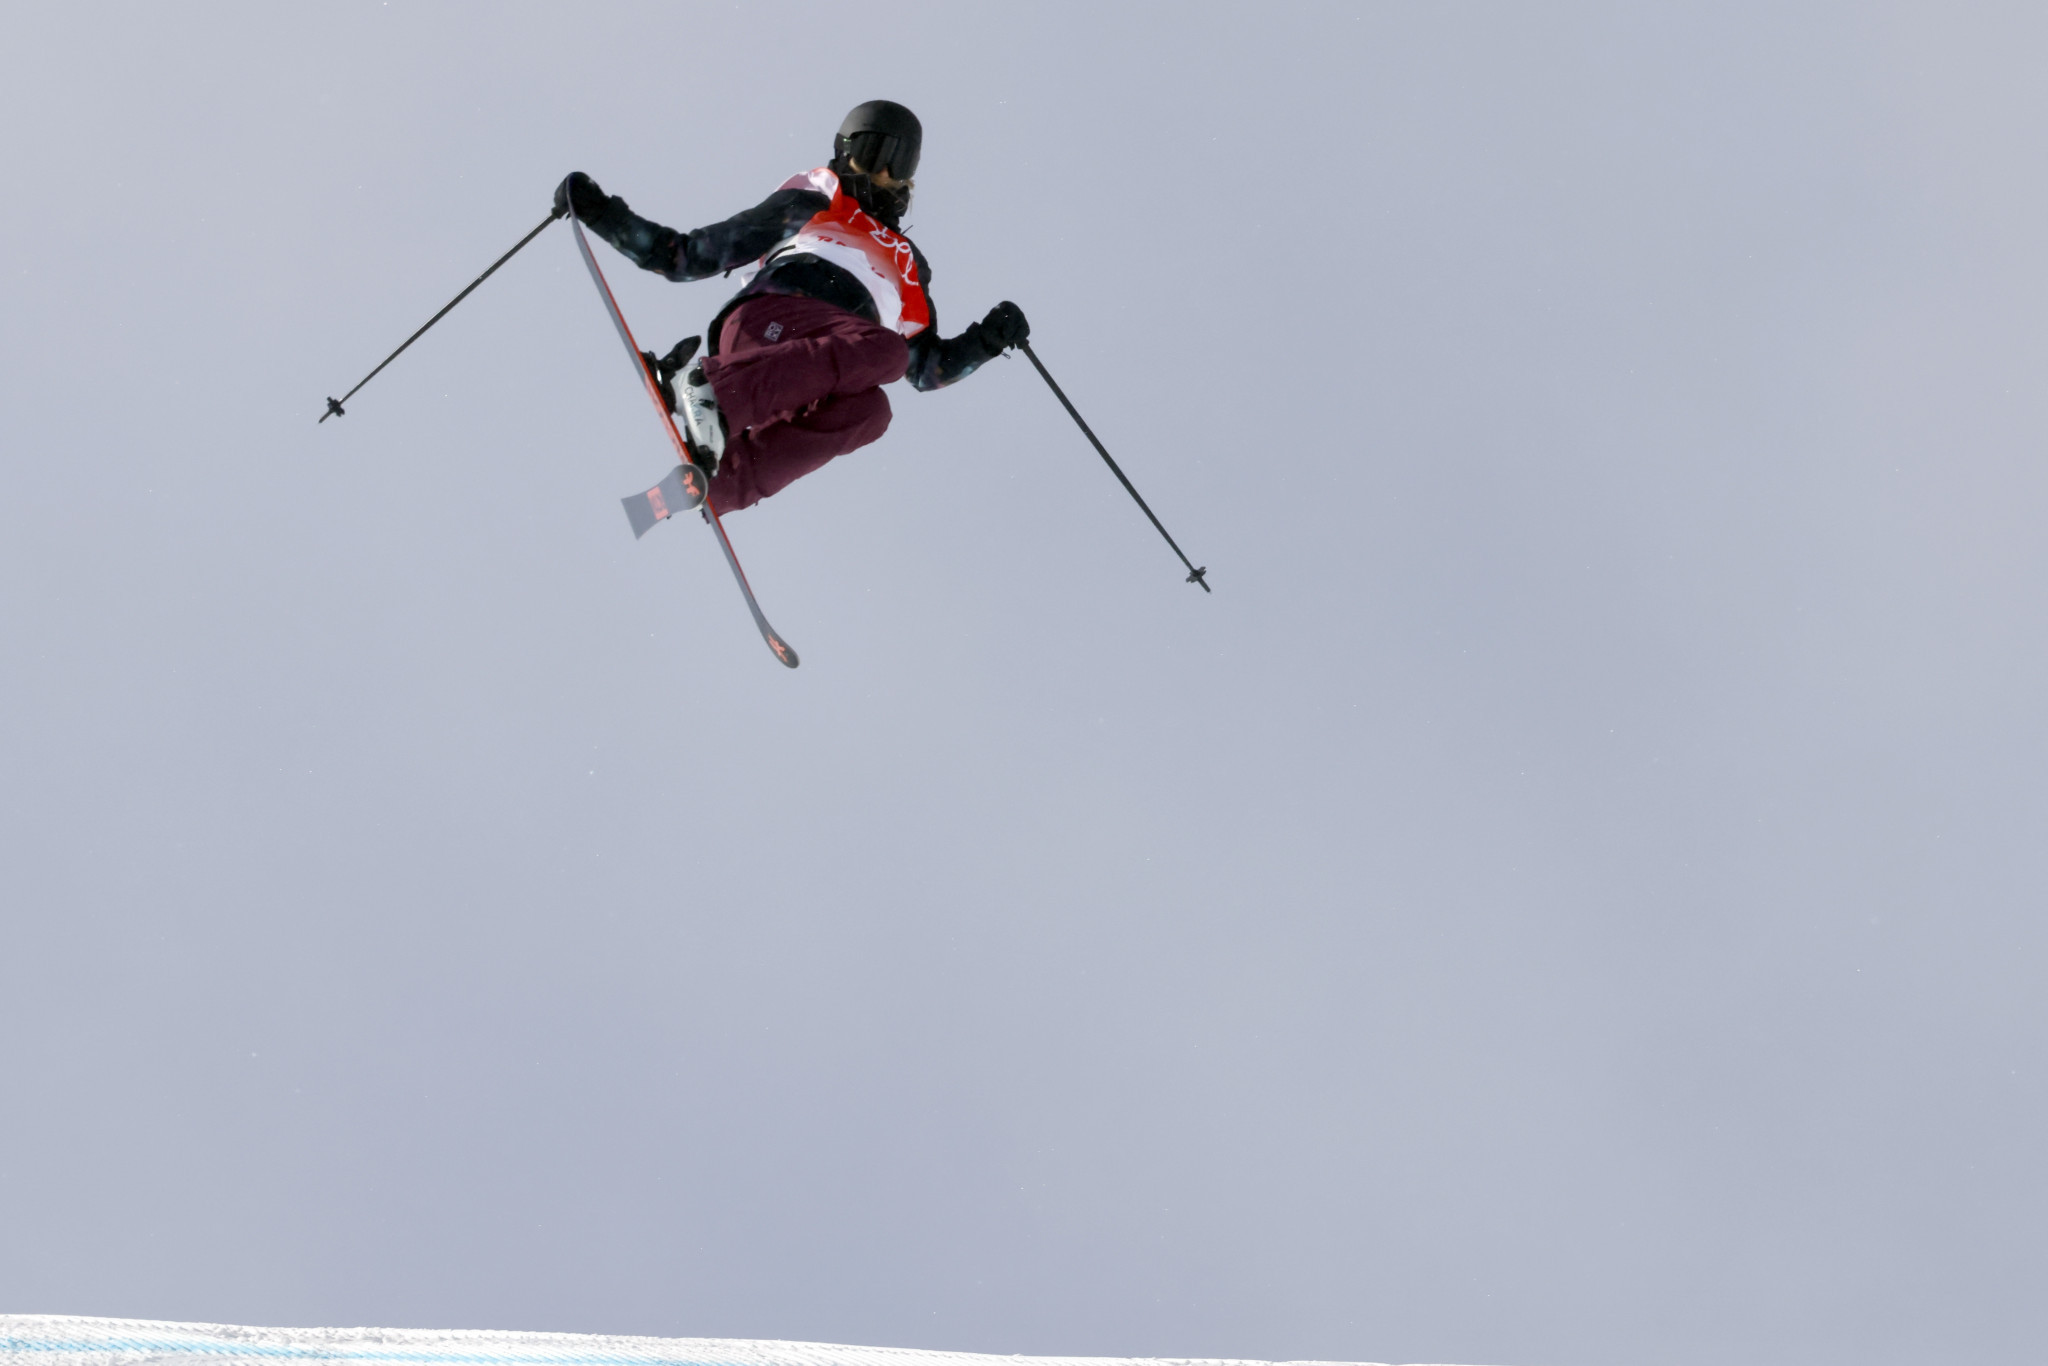 Sildaru wins women’s slopestyle title after gold medal at World Cup in Silvaplana